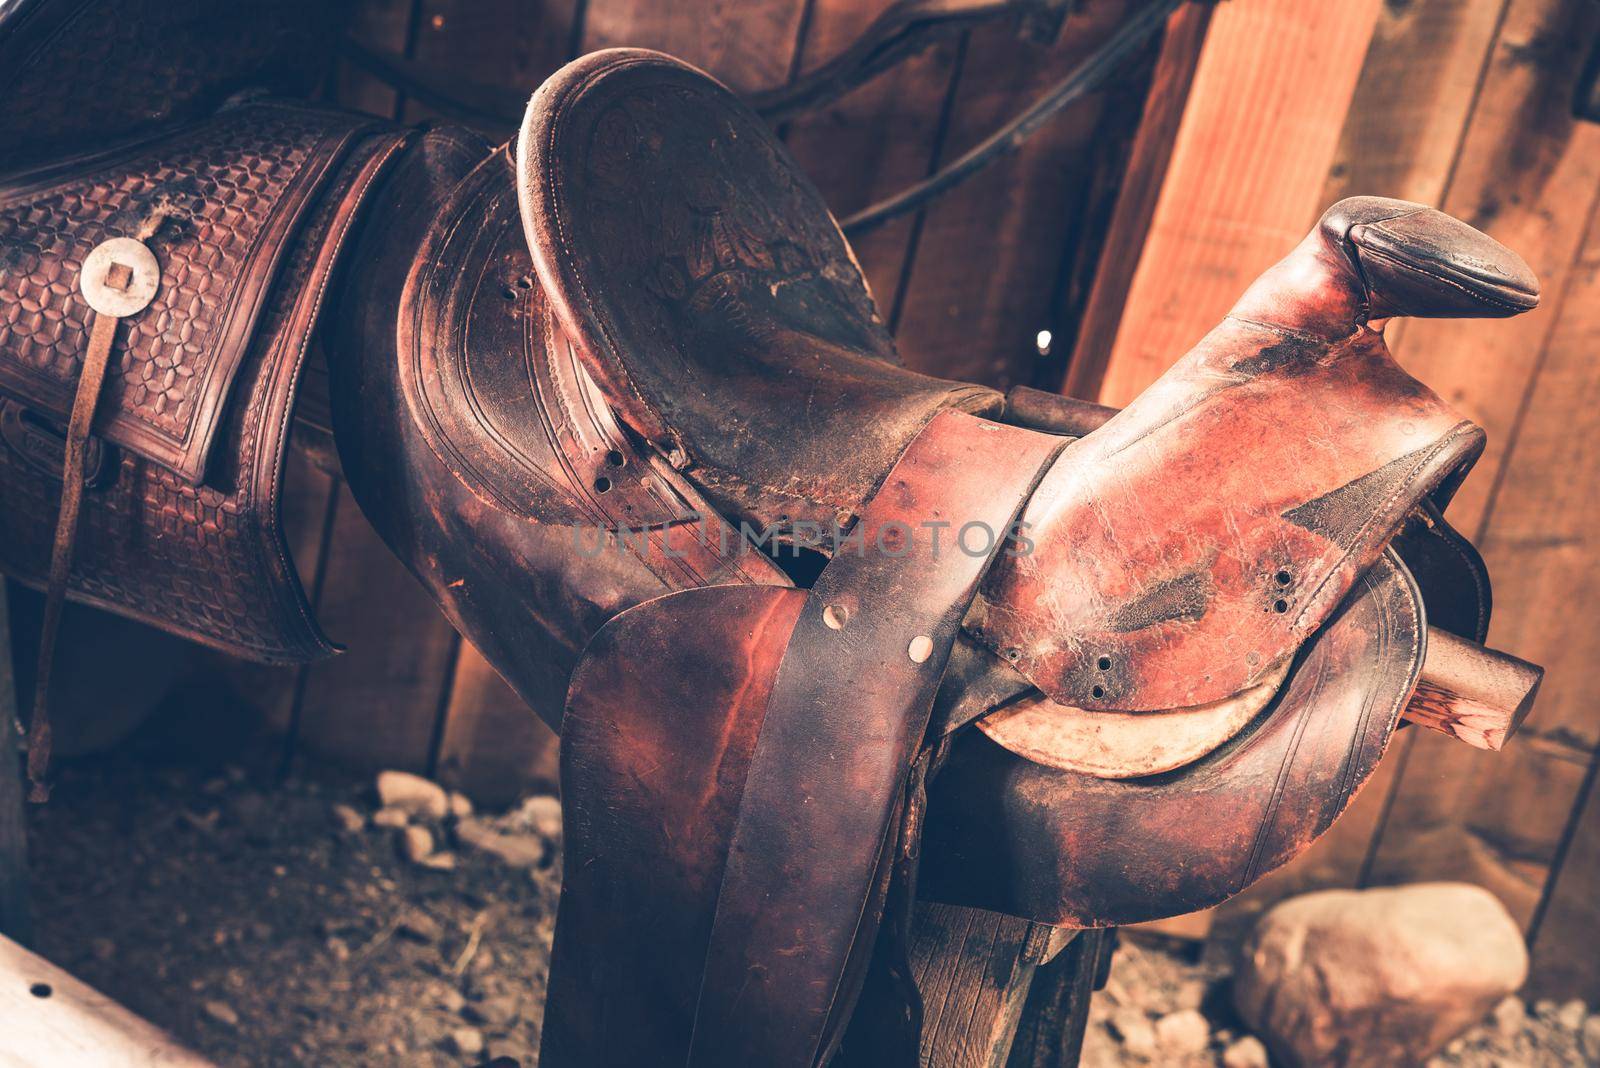 Brown Leather Saddle Closeup. Aged Western Style Saddle. by welcomia